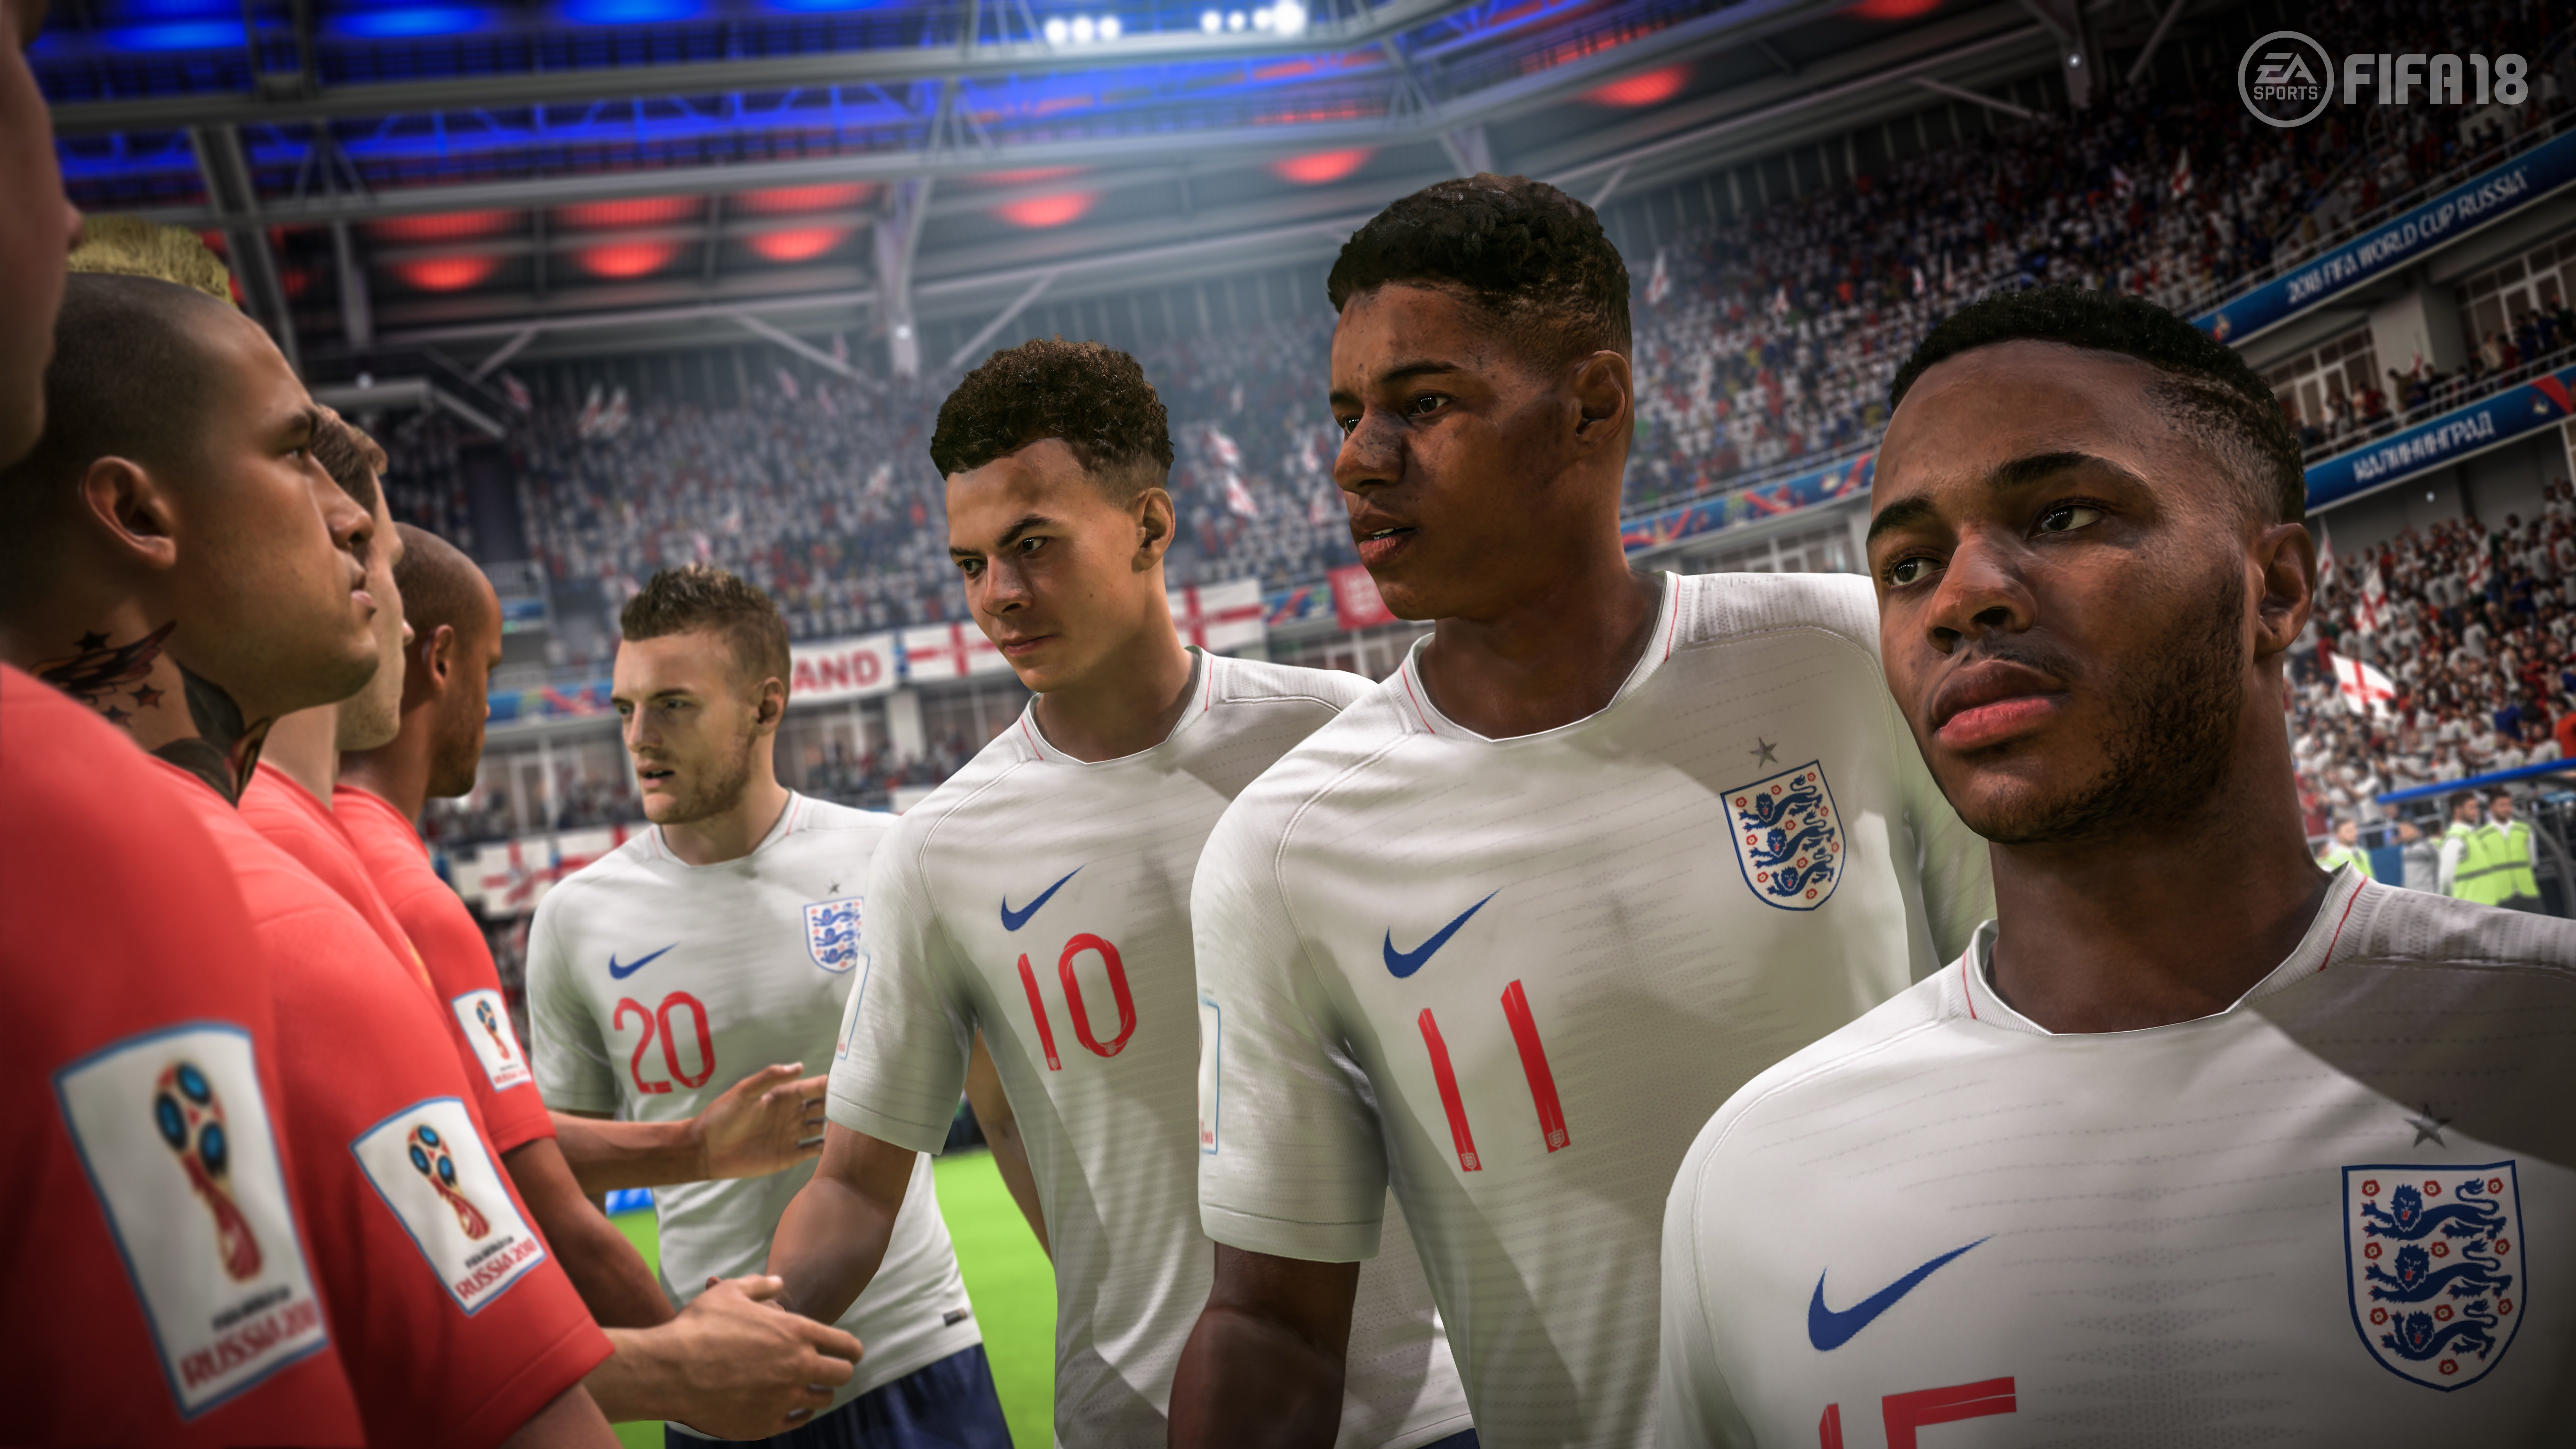 Fifa 18 S Free World Cup Update Available On Ps4 Now Push Square